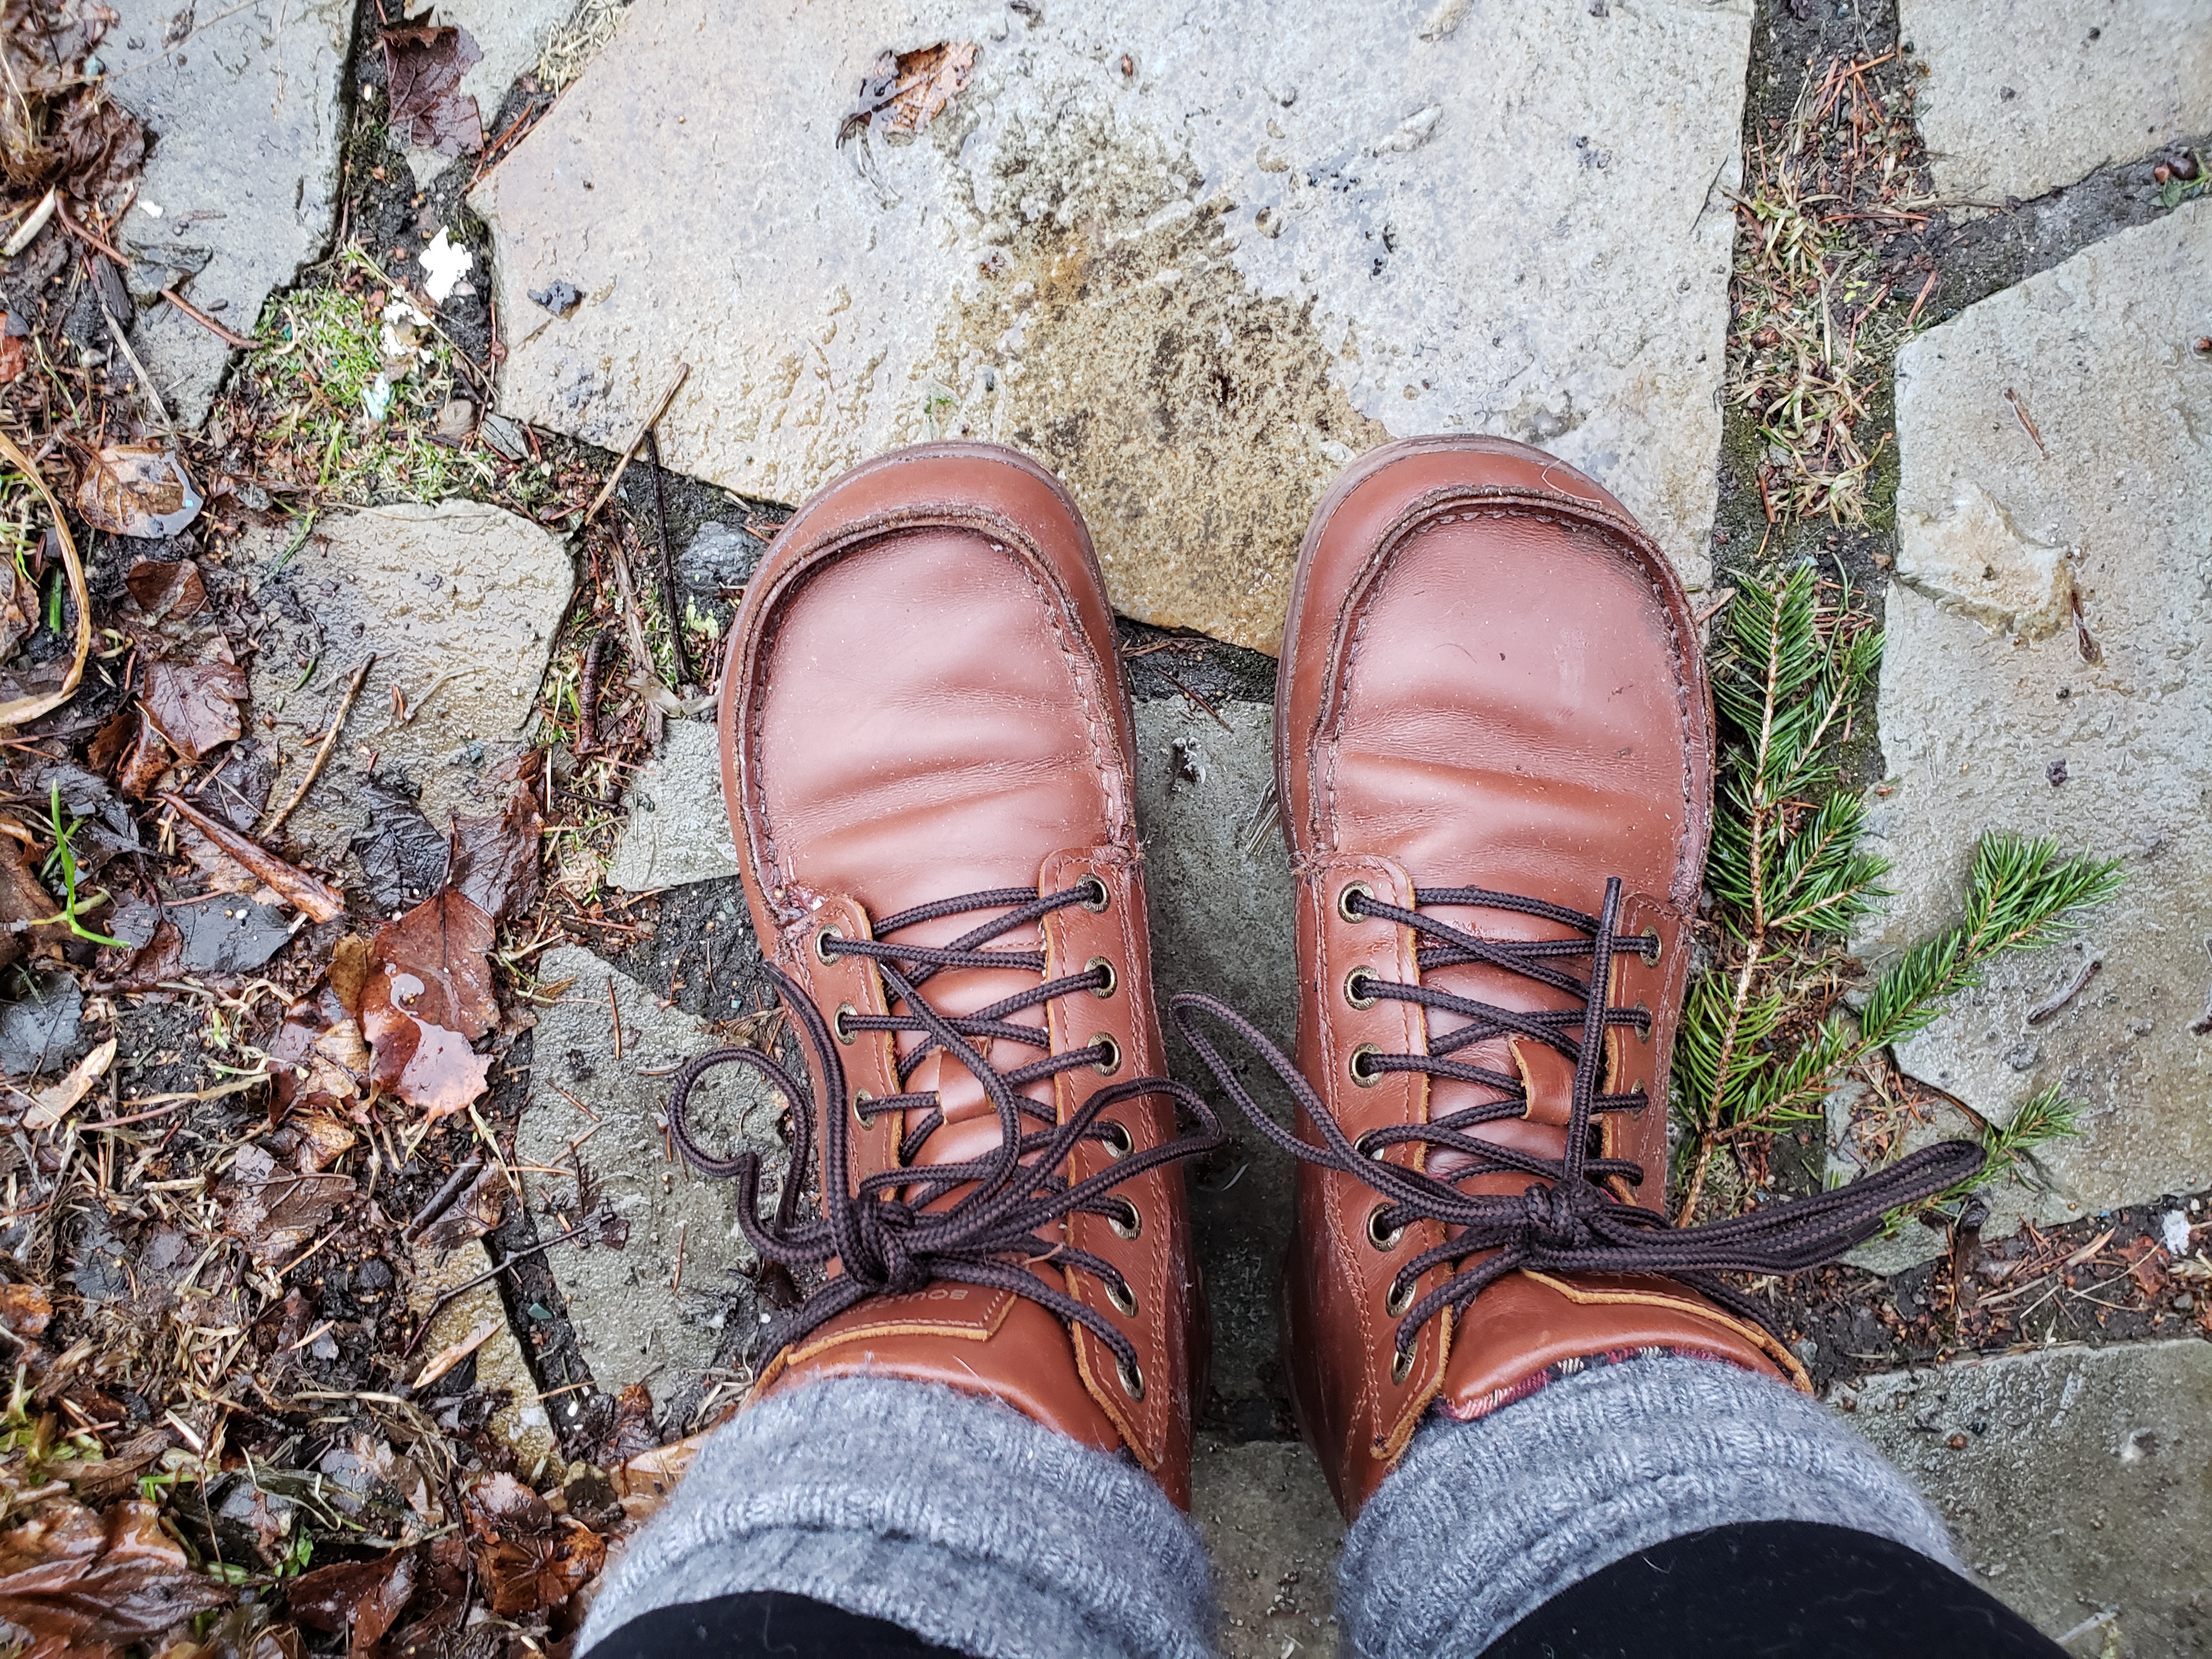 A person's hiking-boot-clad feet, shot from above. The boots are a russet-brown leather with dark brown laces. The person is also wearing grey wool socks and black leggings. They are standing on a rain-slicked flagstone path.